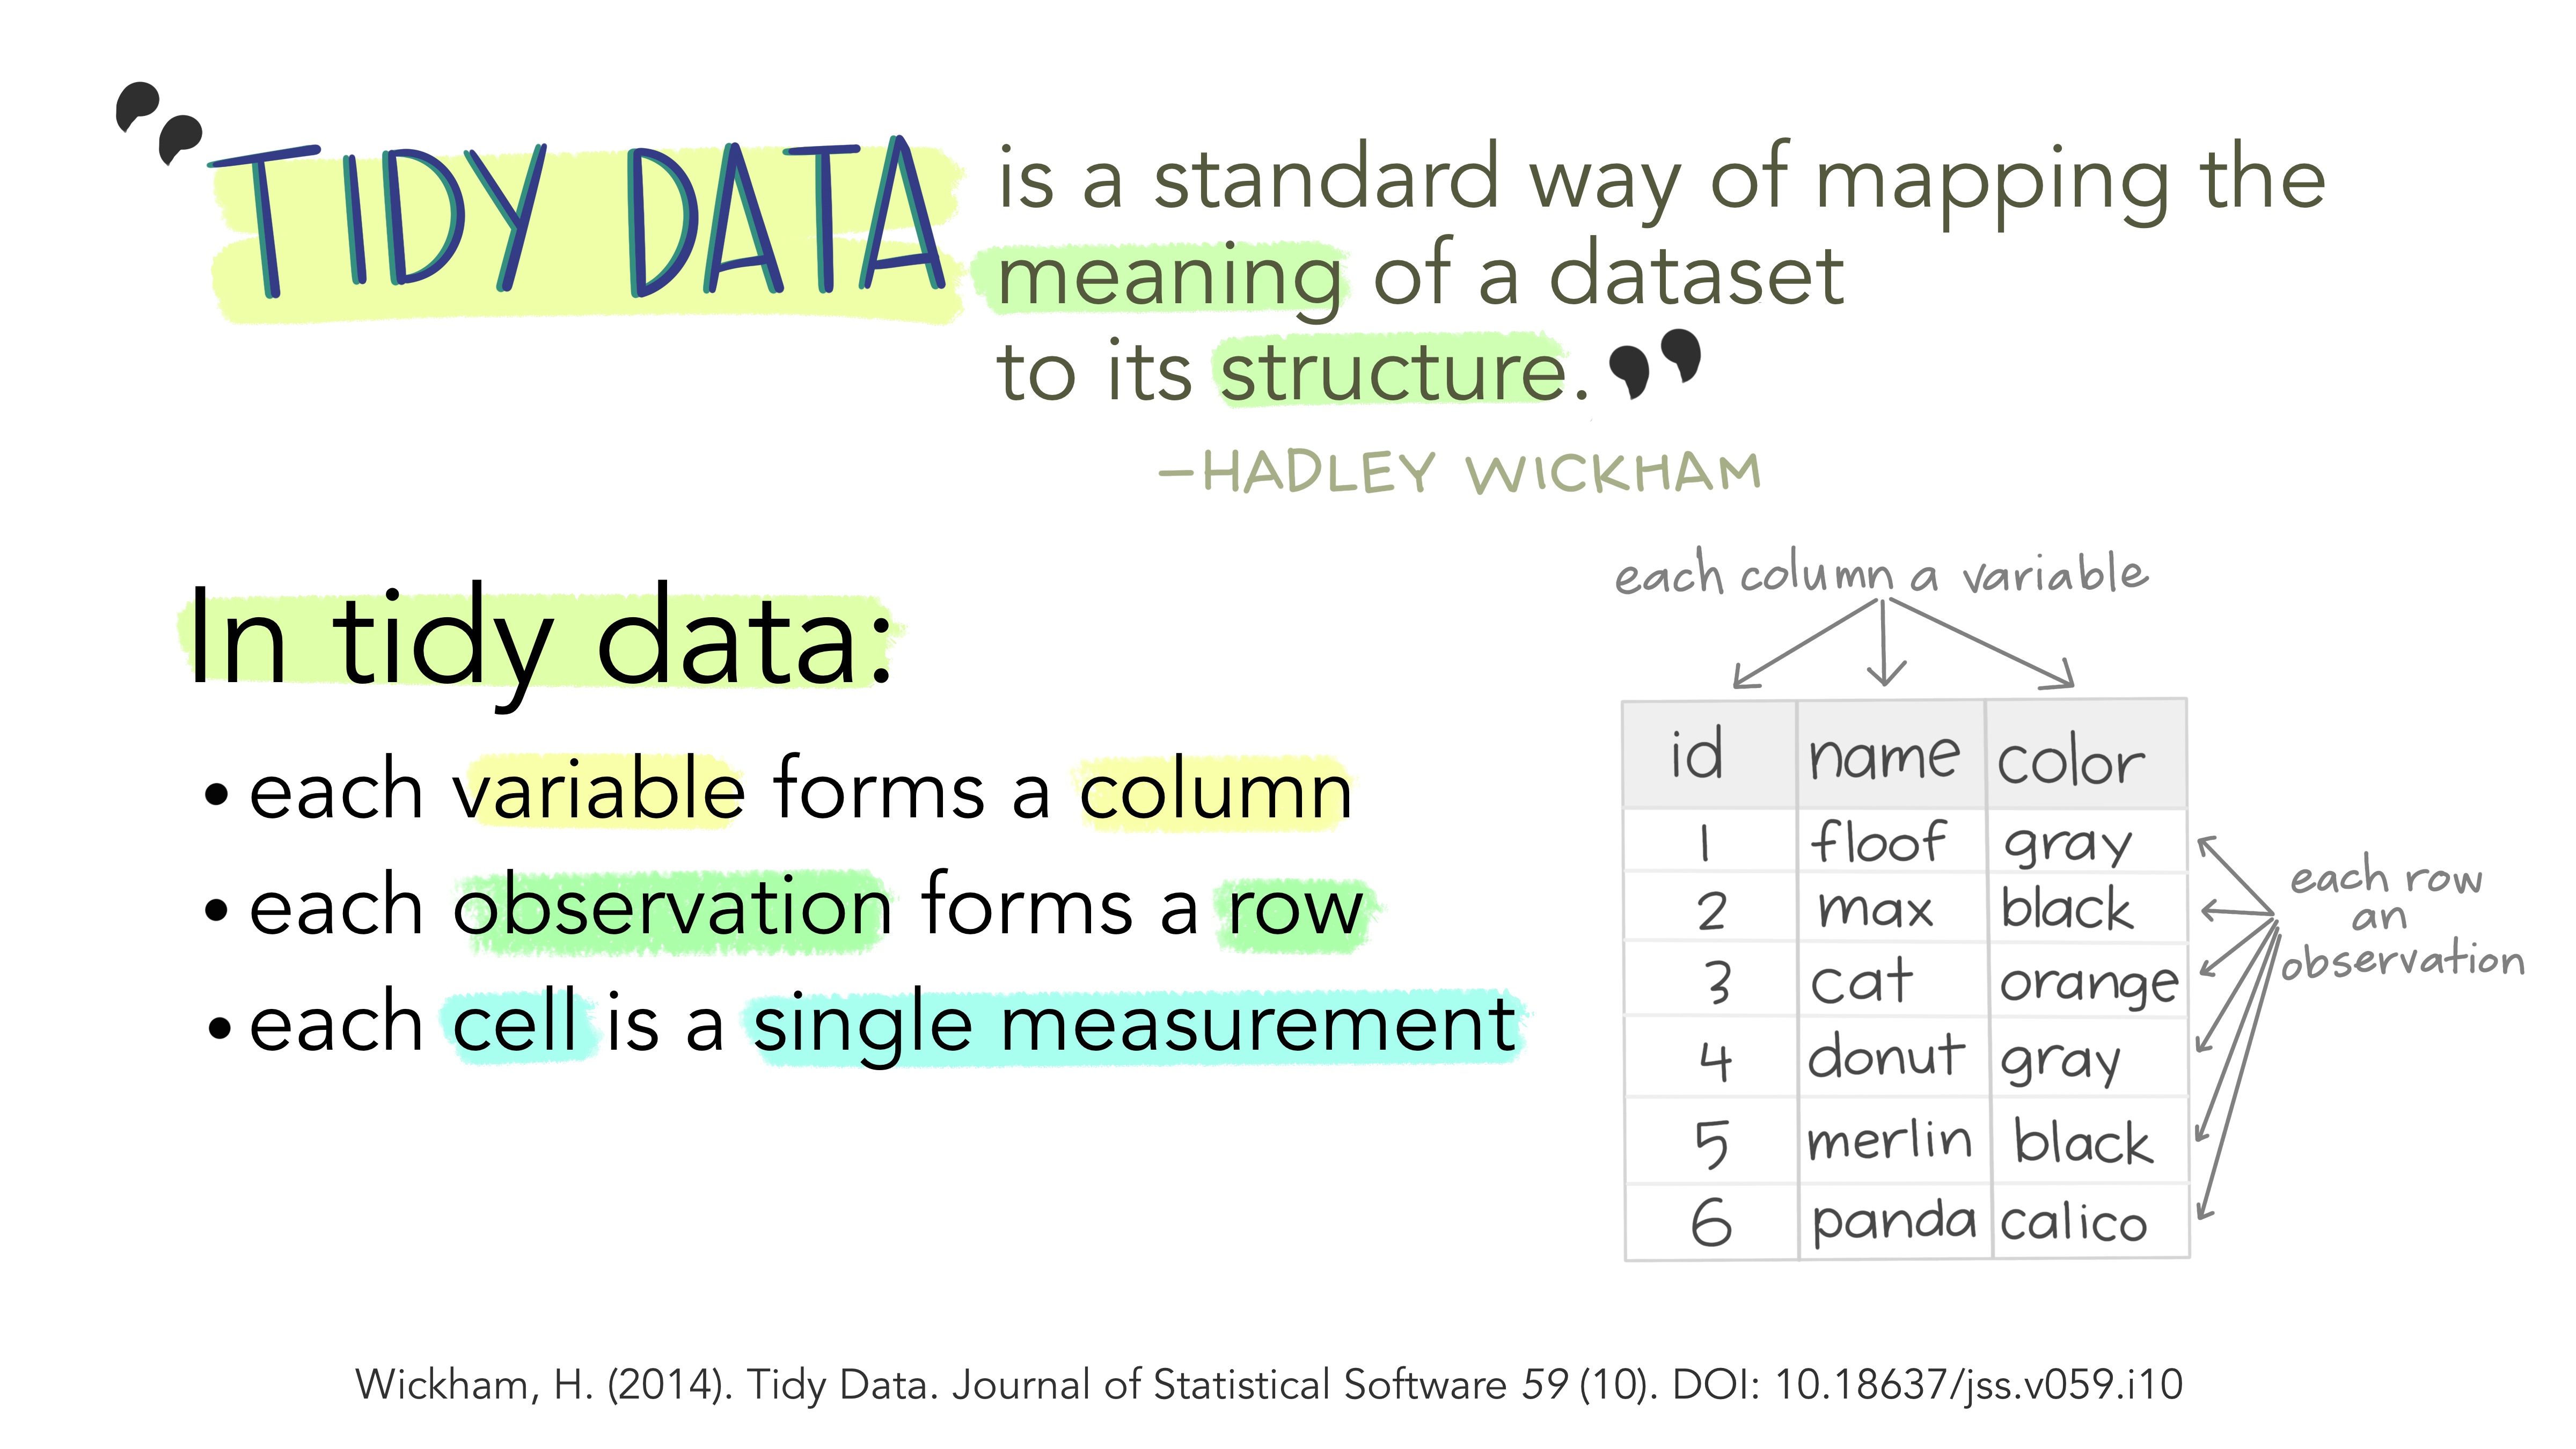 Stylized text providing an overview of Tidy Data. The top reads "Tidy data is a standard way of mapping the meaning of a dataset to its structure. - Hadley Wickham." On the left reads "In tidy data: each variable forms a column; each observation forms a row; each cell is a single measurement." There is an example table on the lower right with columns 'id', 'name' and 'color' with observations for different cats, illustrating tidy data structure.